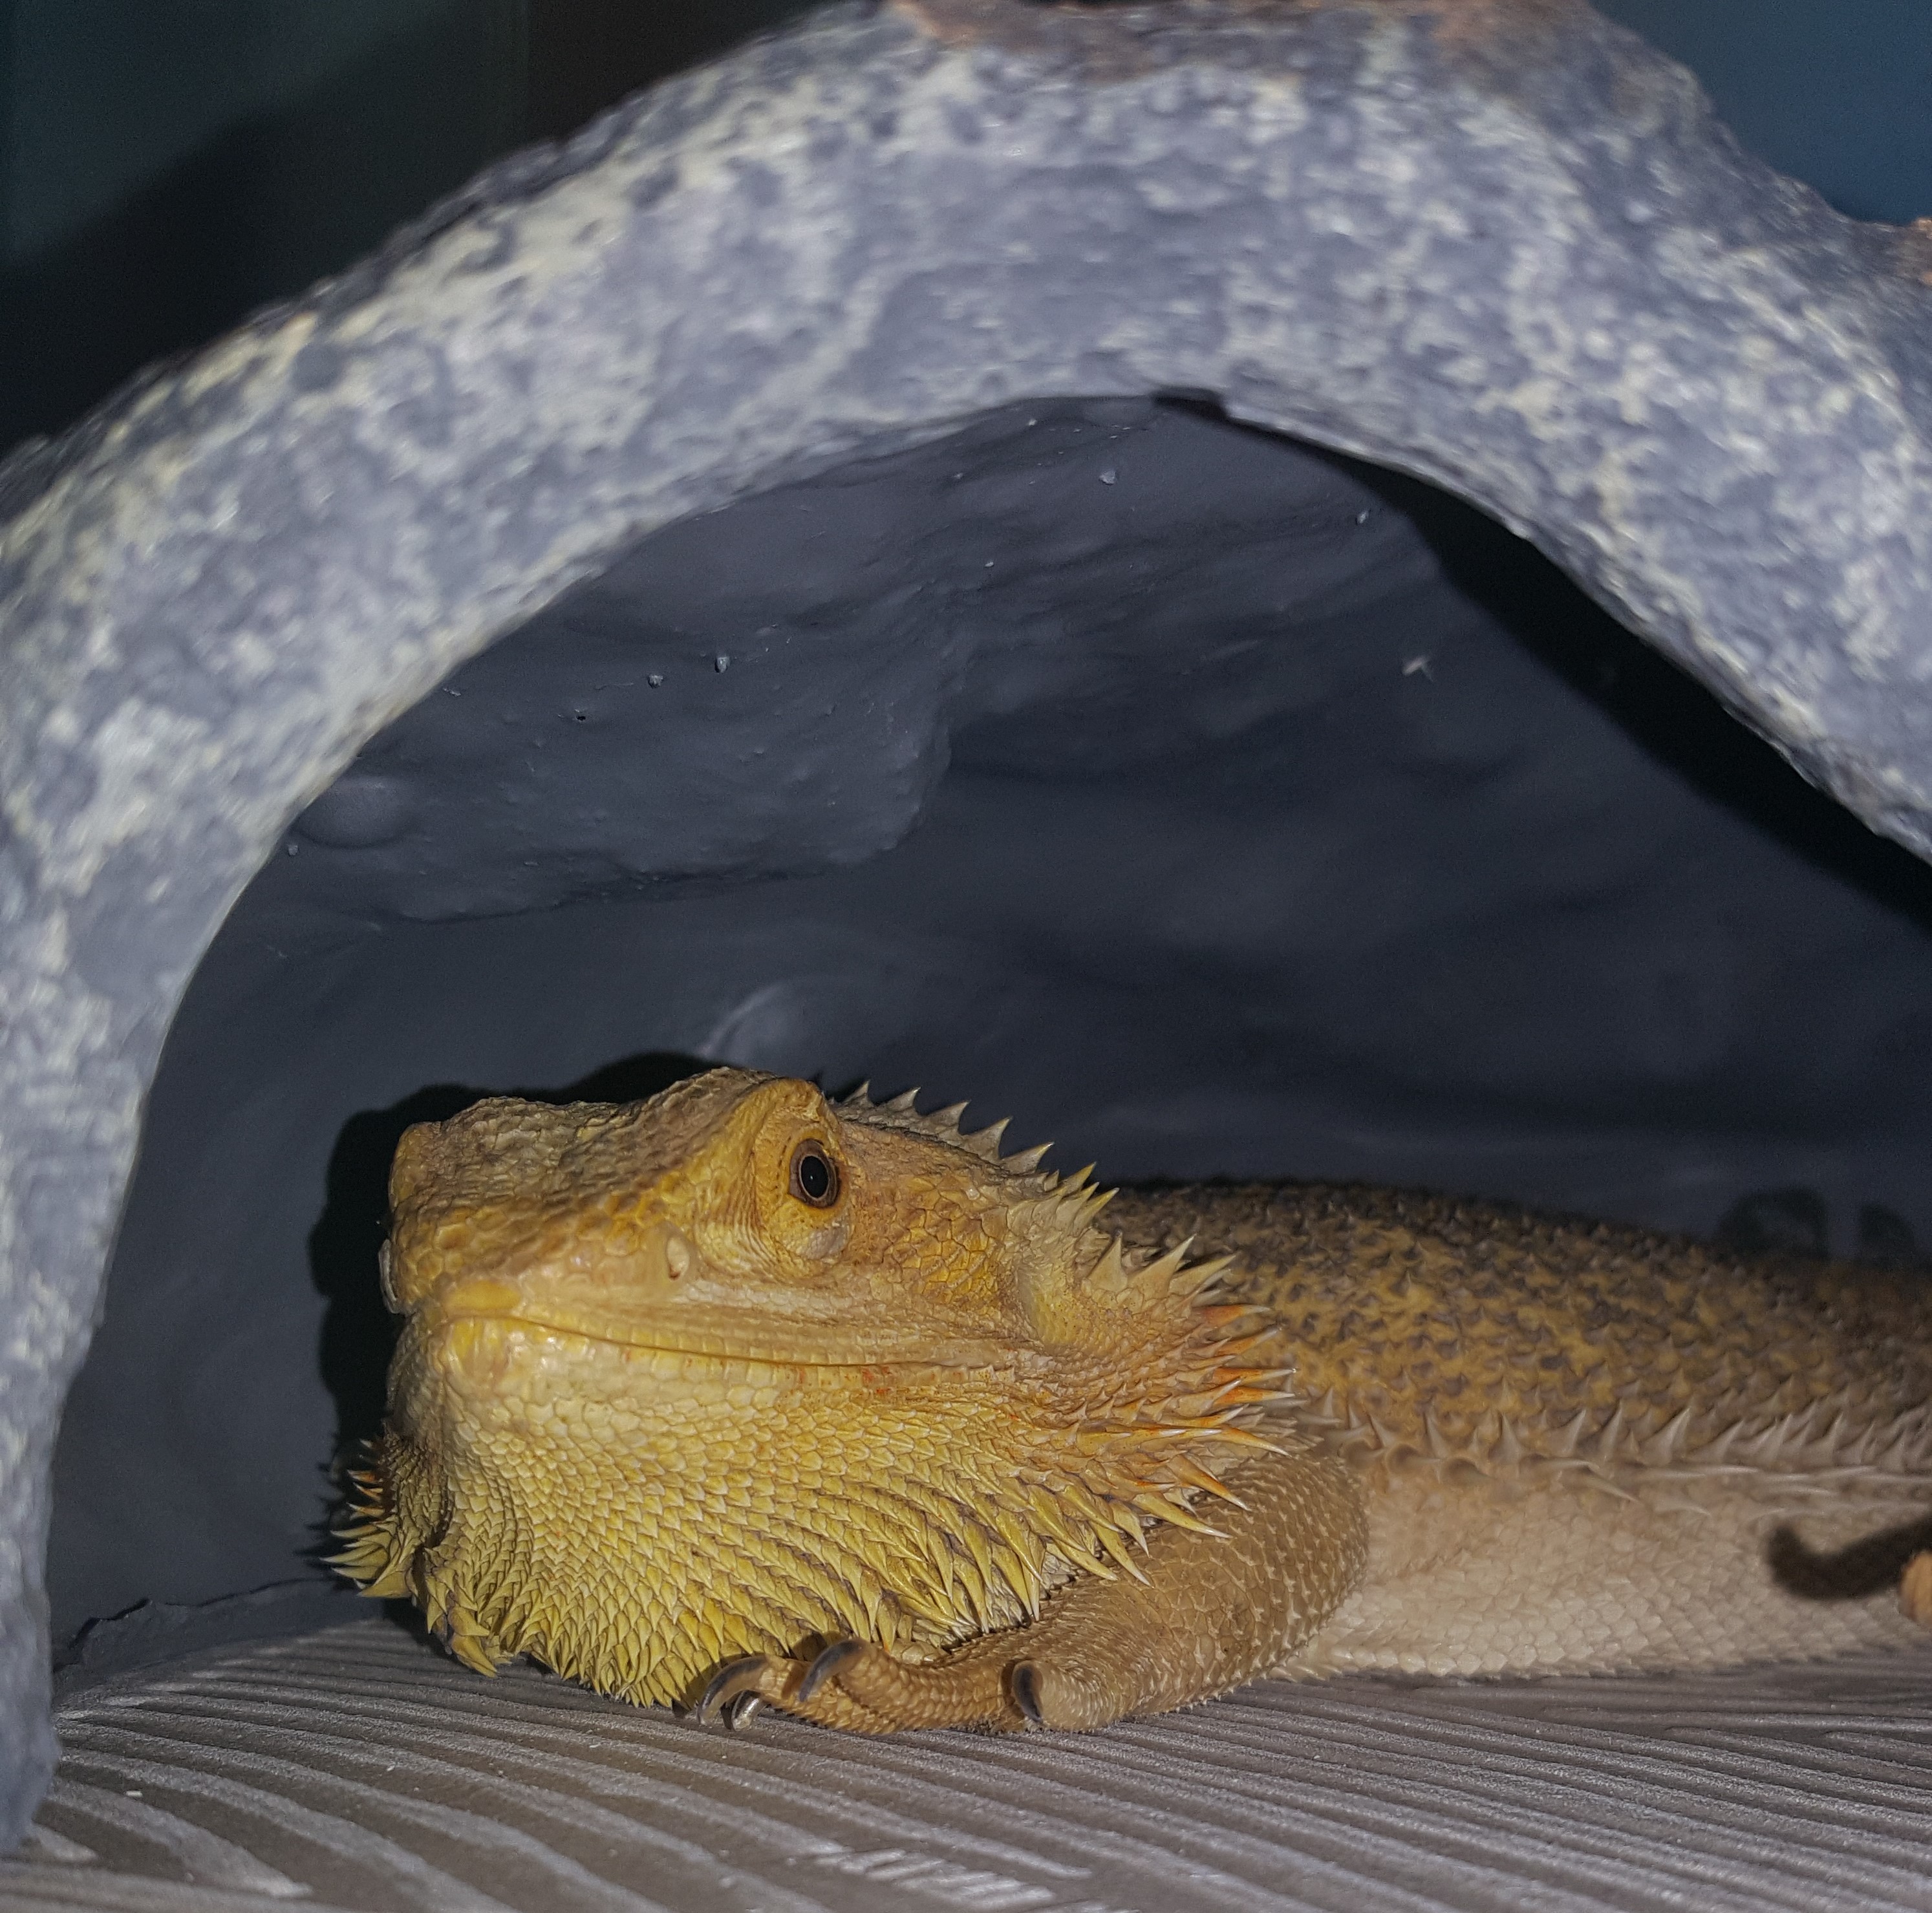 Chillin in her cave